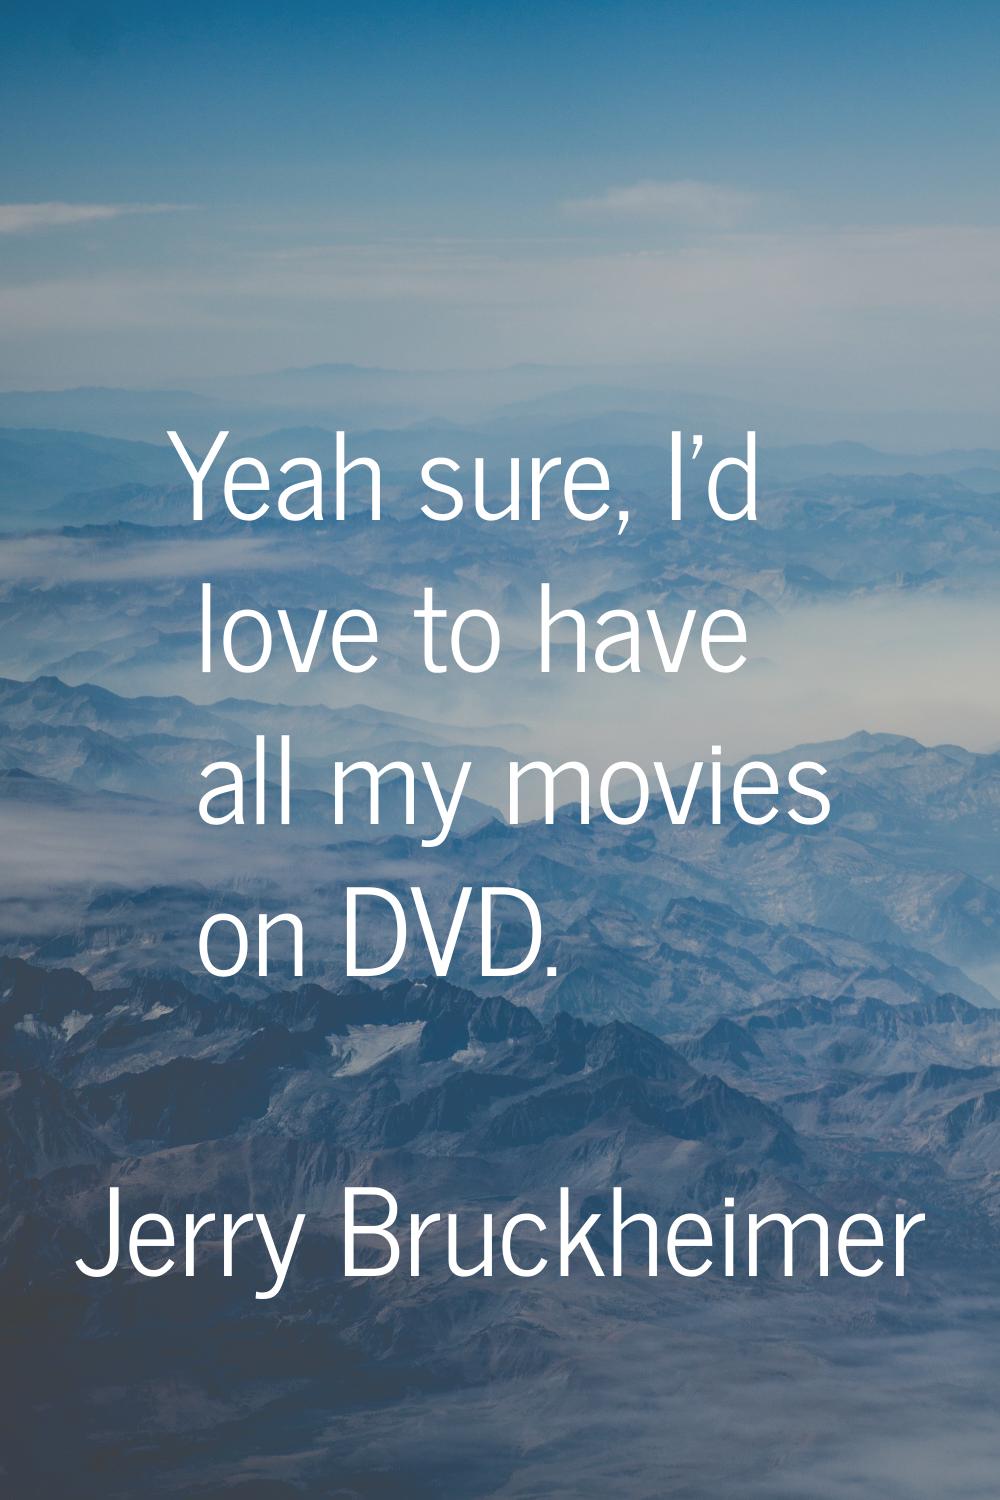 Yeah sure, I'd love to have all my movies on DVD.